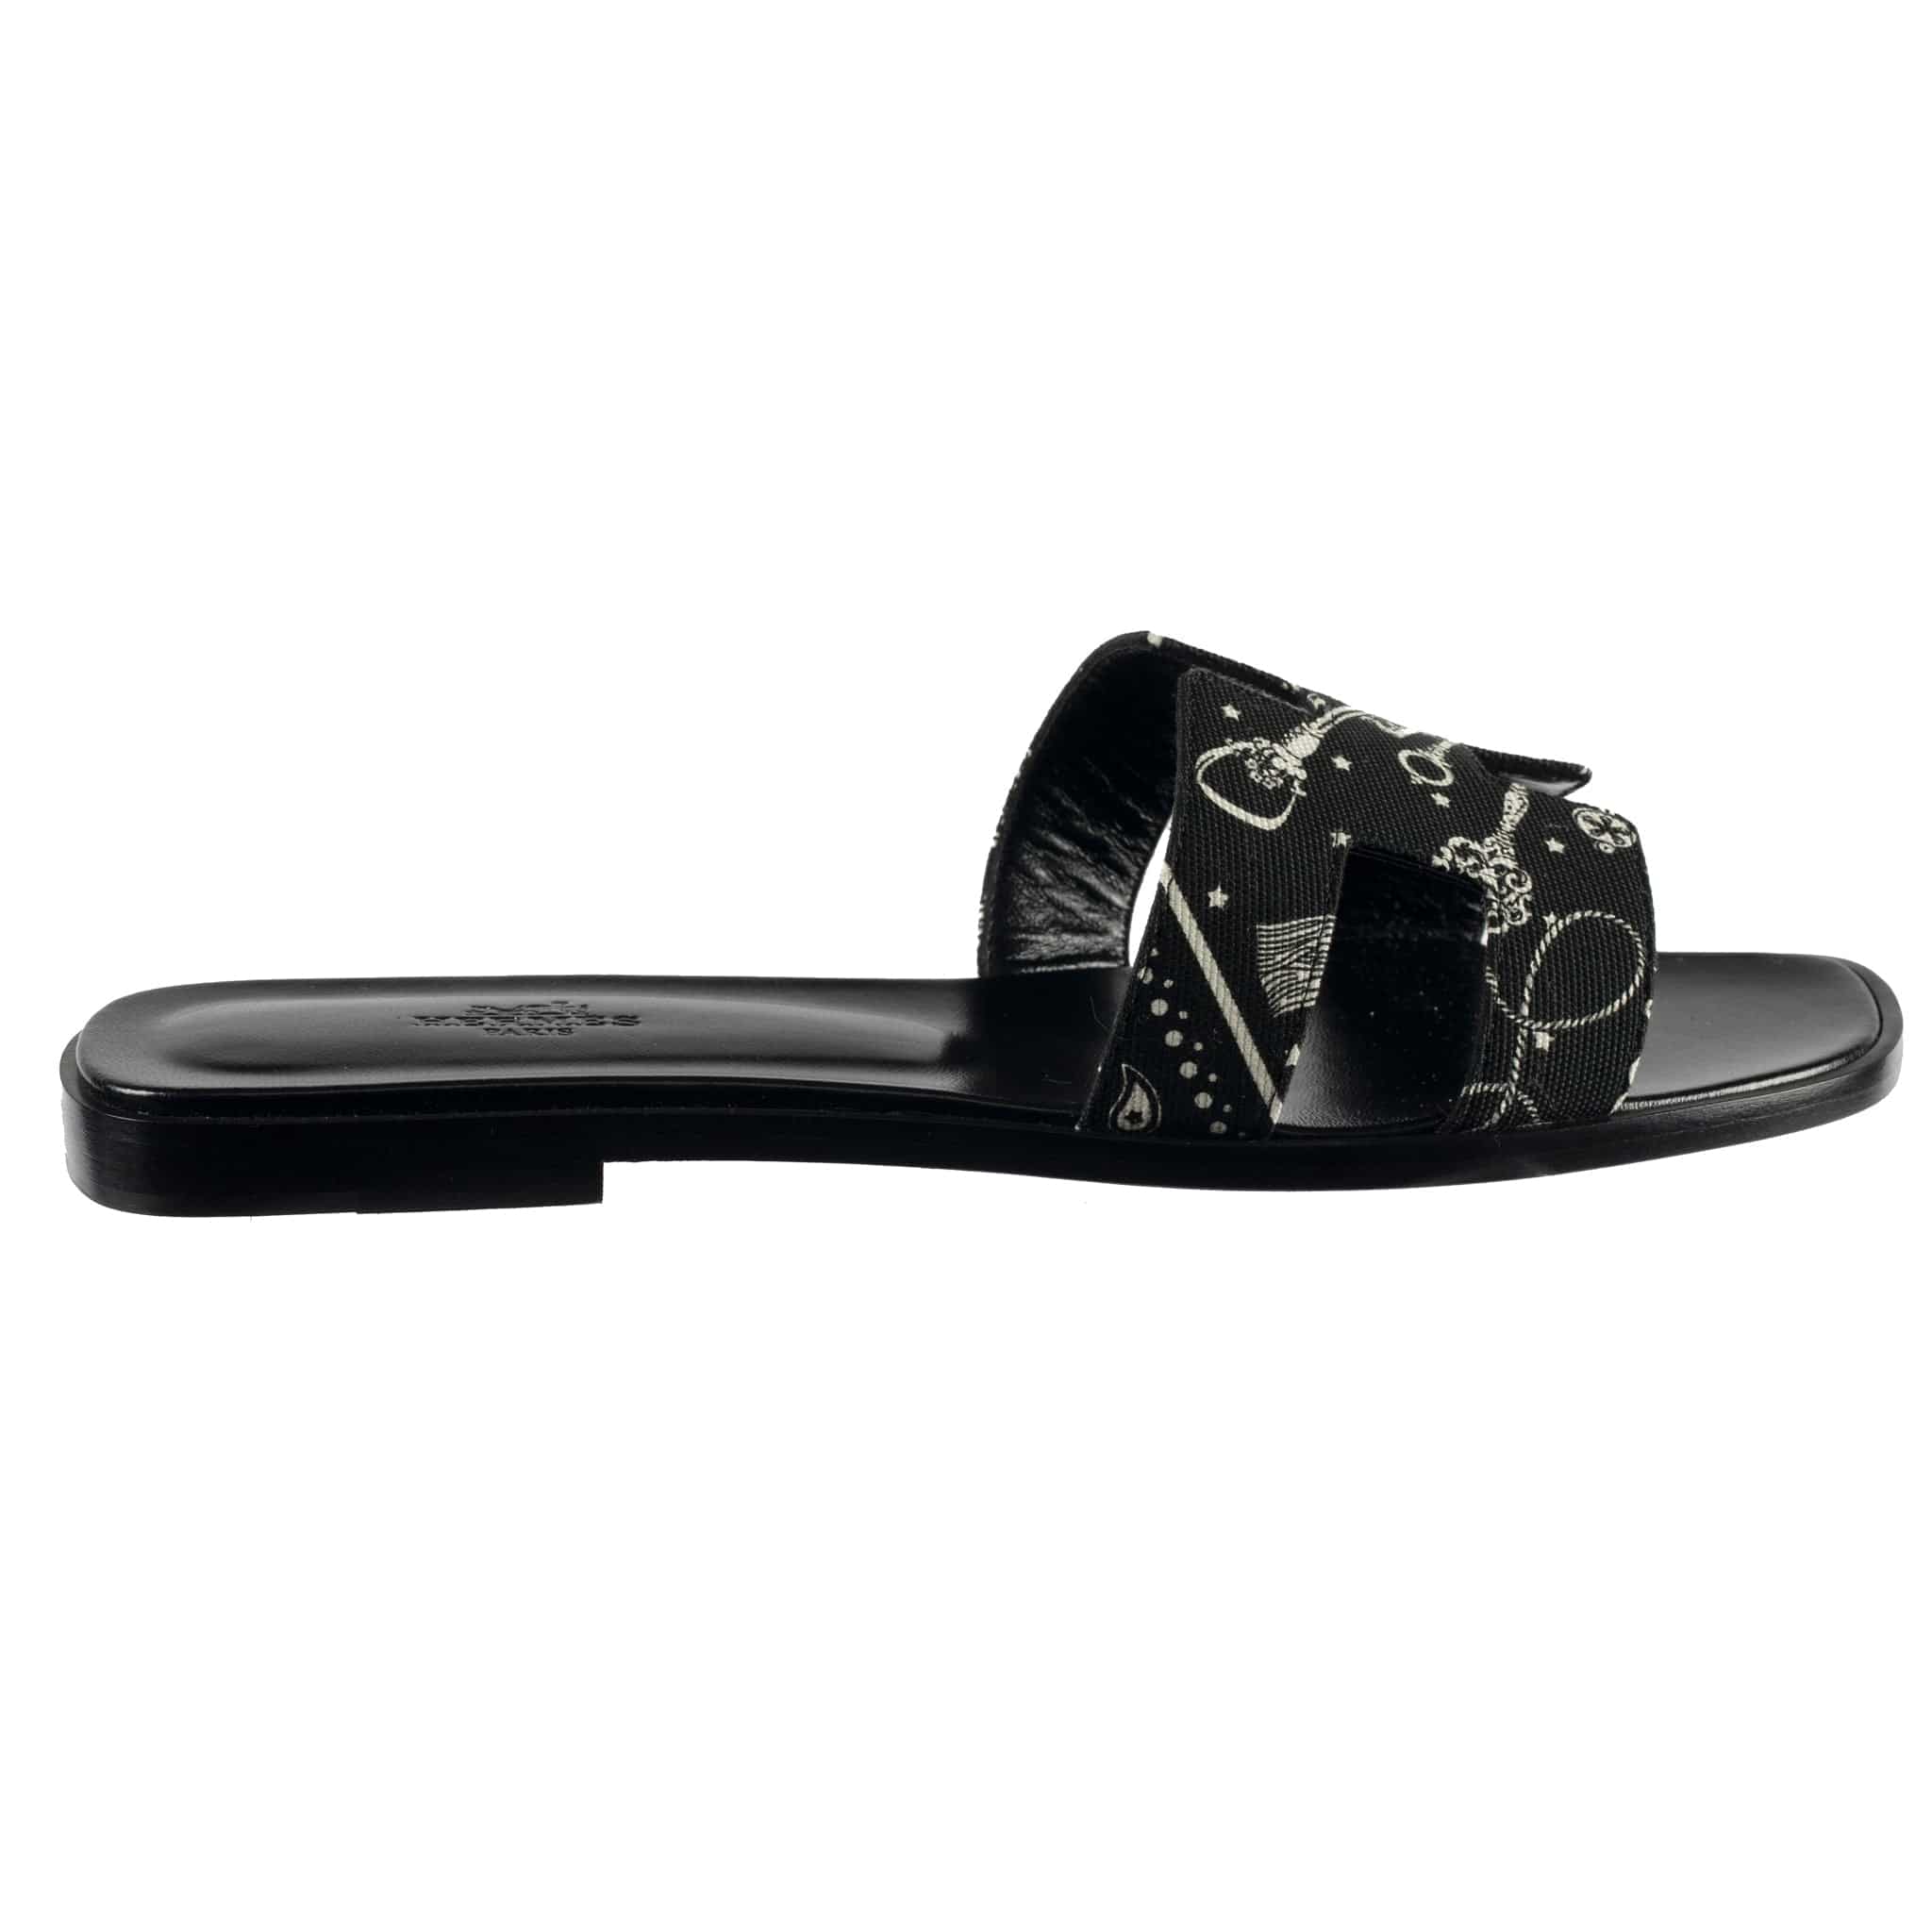 HERMES ORAN SANDAL BLACK SMOOTH LEATHER WITH CANVAS PATTERN 38 FR - On Repeat